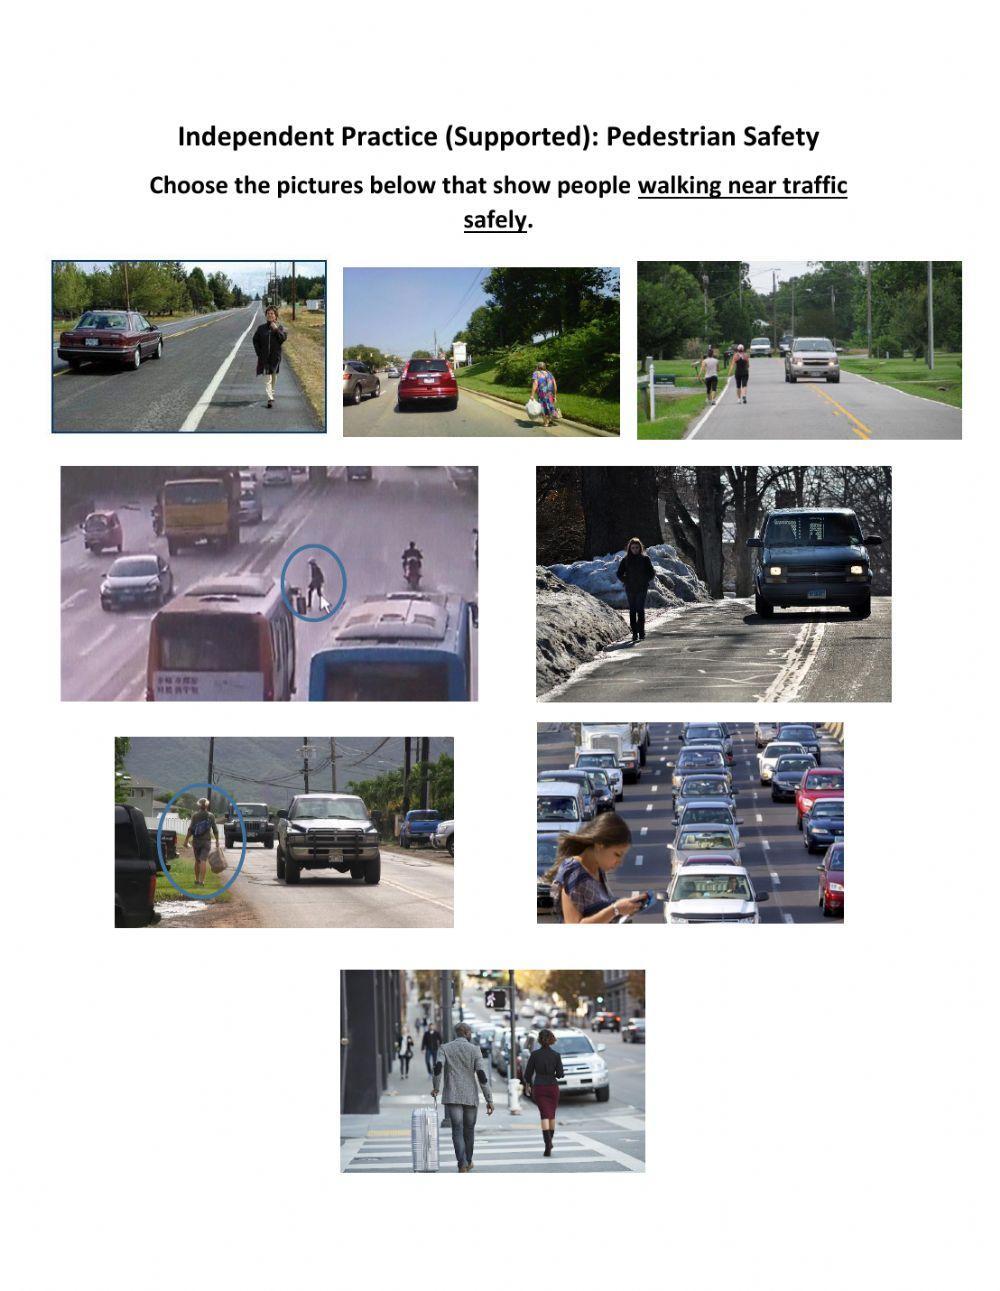 Independent Practice (Supported) - Pedestrian Safety